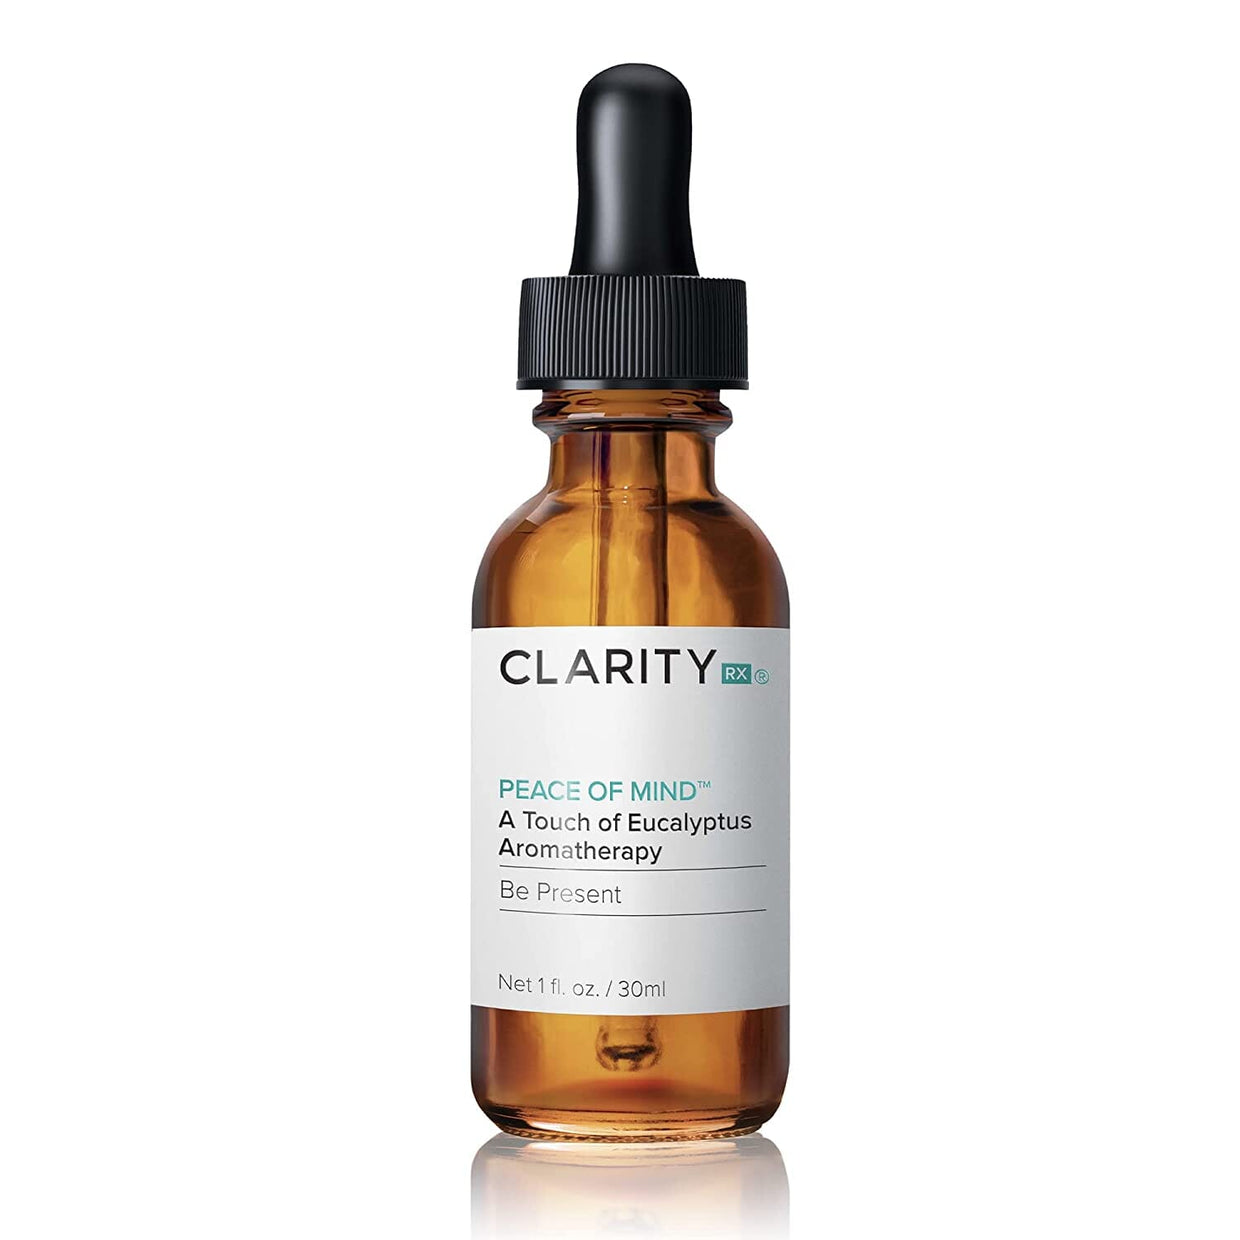 ClarityRx Peace of Mind Be Present A Touch of Eucalyptus Aromatherapy ClarityRx 1 fl. oz. Shop at Exclusive Beauty Club